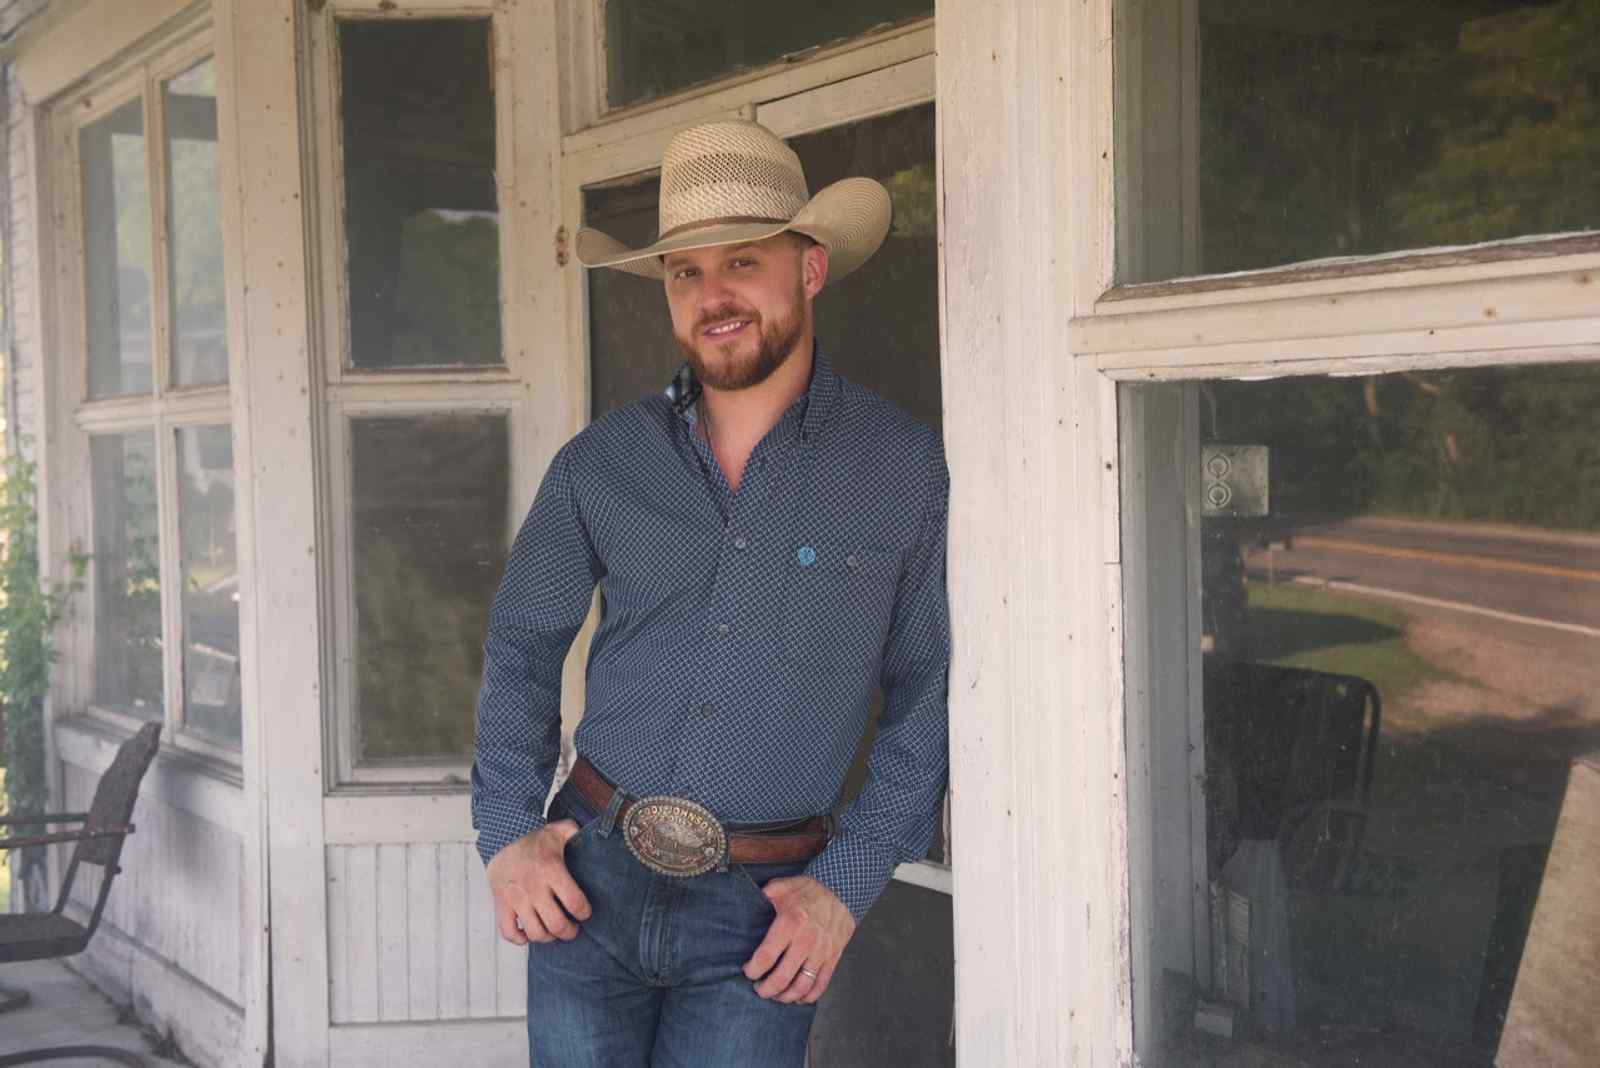 TEXAS NATIVE CODY JOHNSON WILL HELP KICK OFF THE RODEO’S 90TH ANNIVERSARY CELEBRATION WITH OPENING PERFORMANCE AT RODEOHOUSTON®